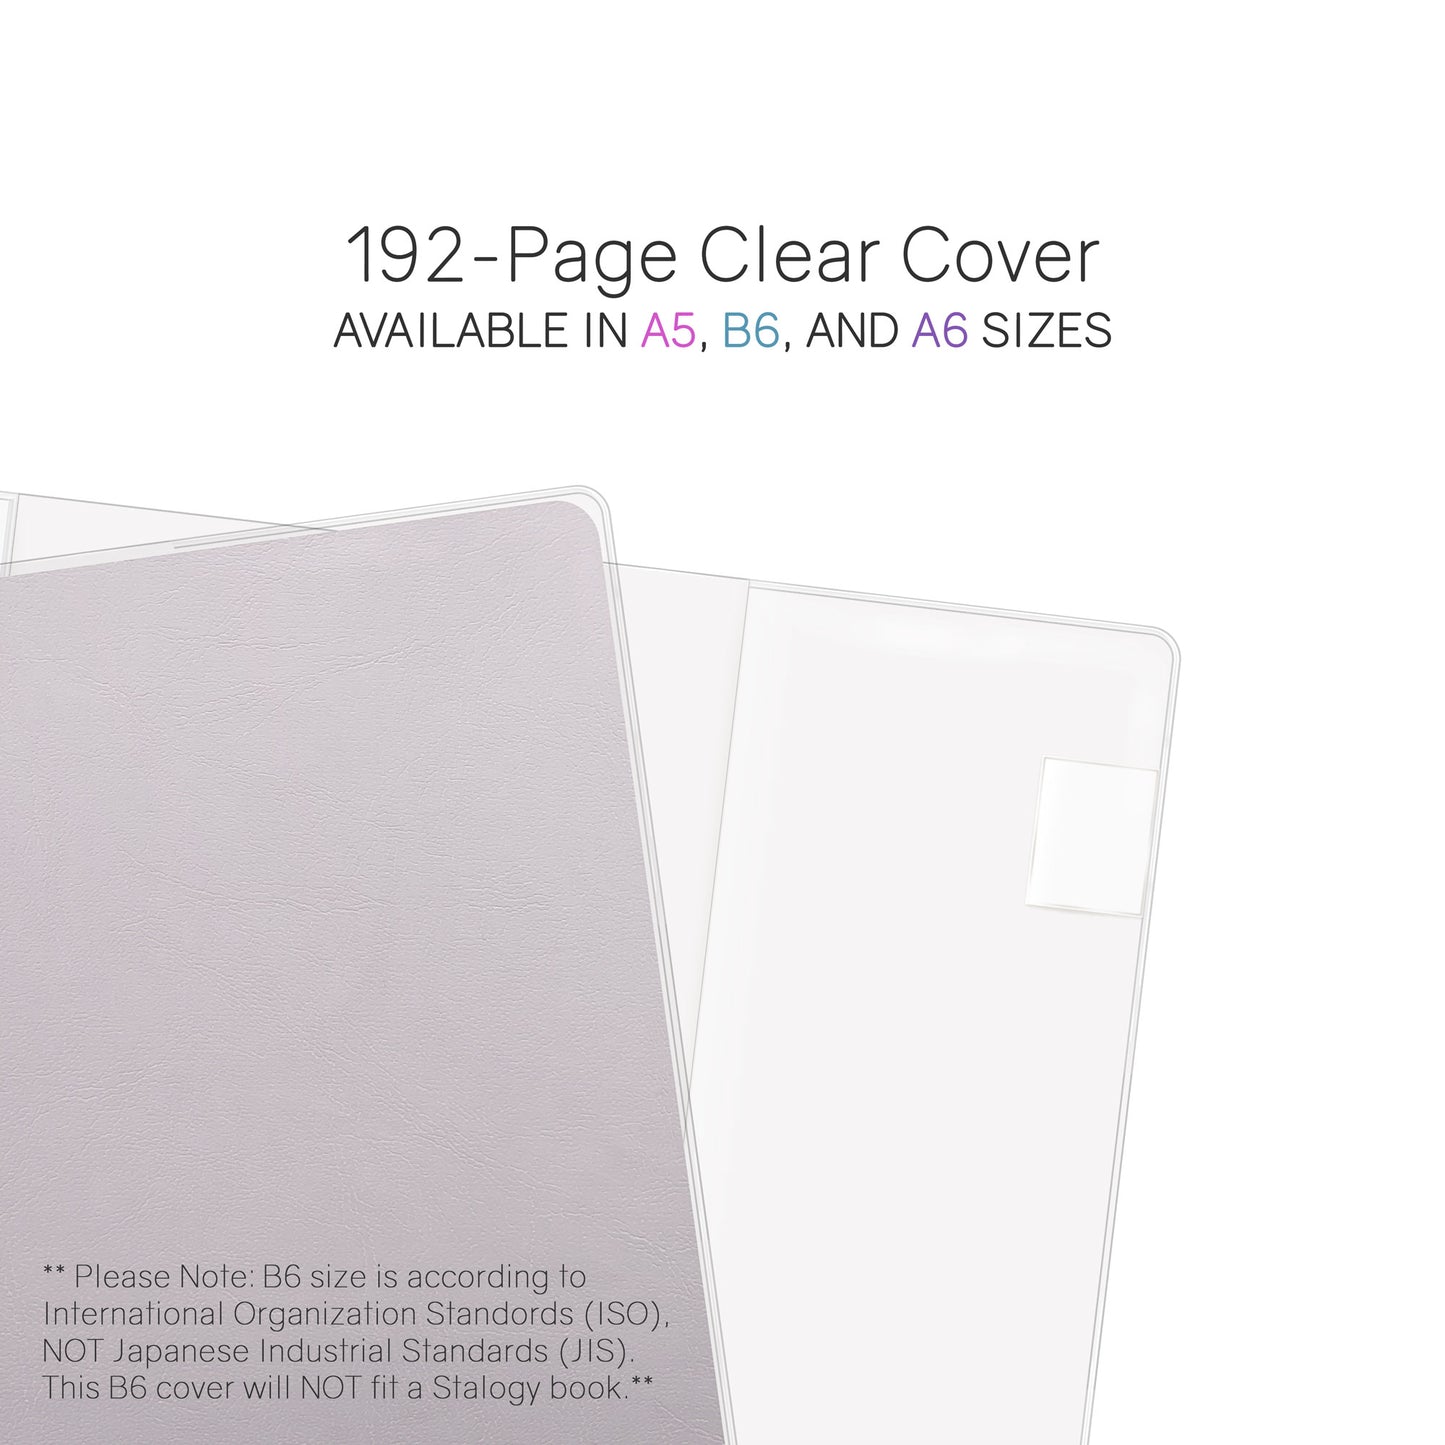 WONDERLAND 222 - CLEAR COVERS VARIOUS SIZES